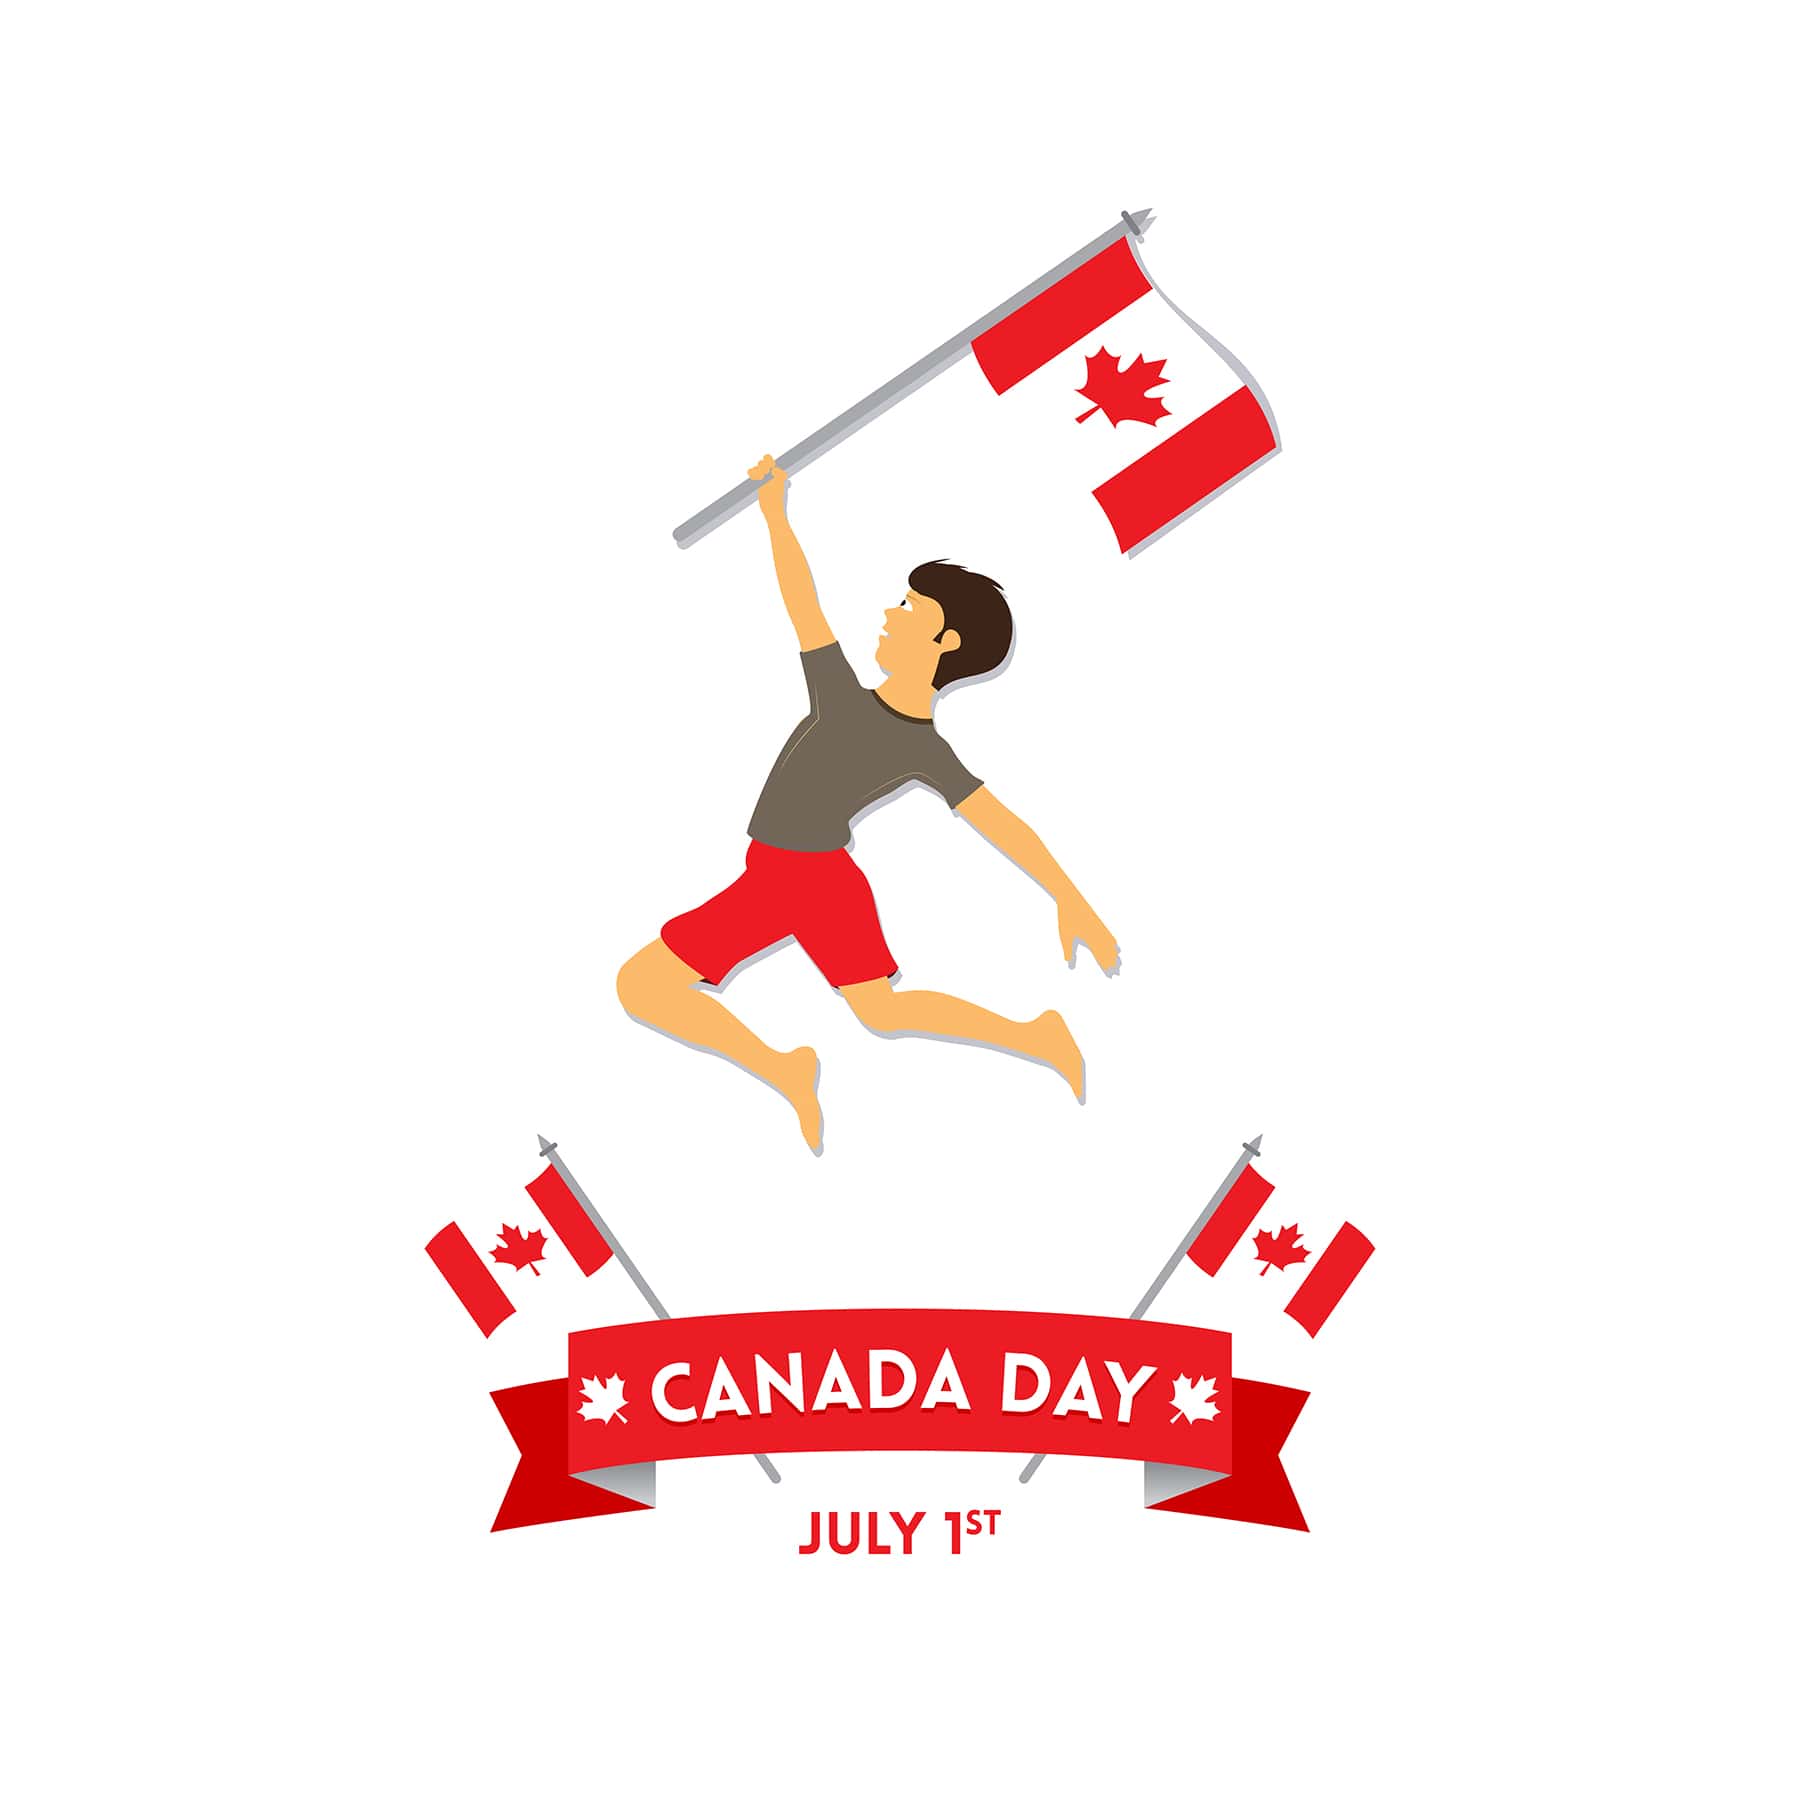 Boy holding Canadian flag vector free download